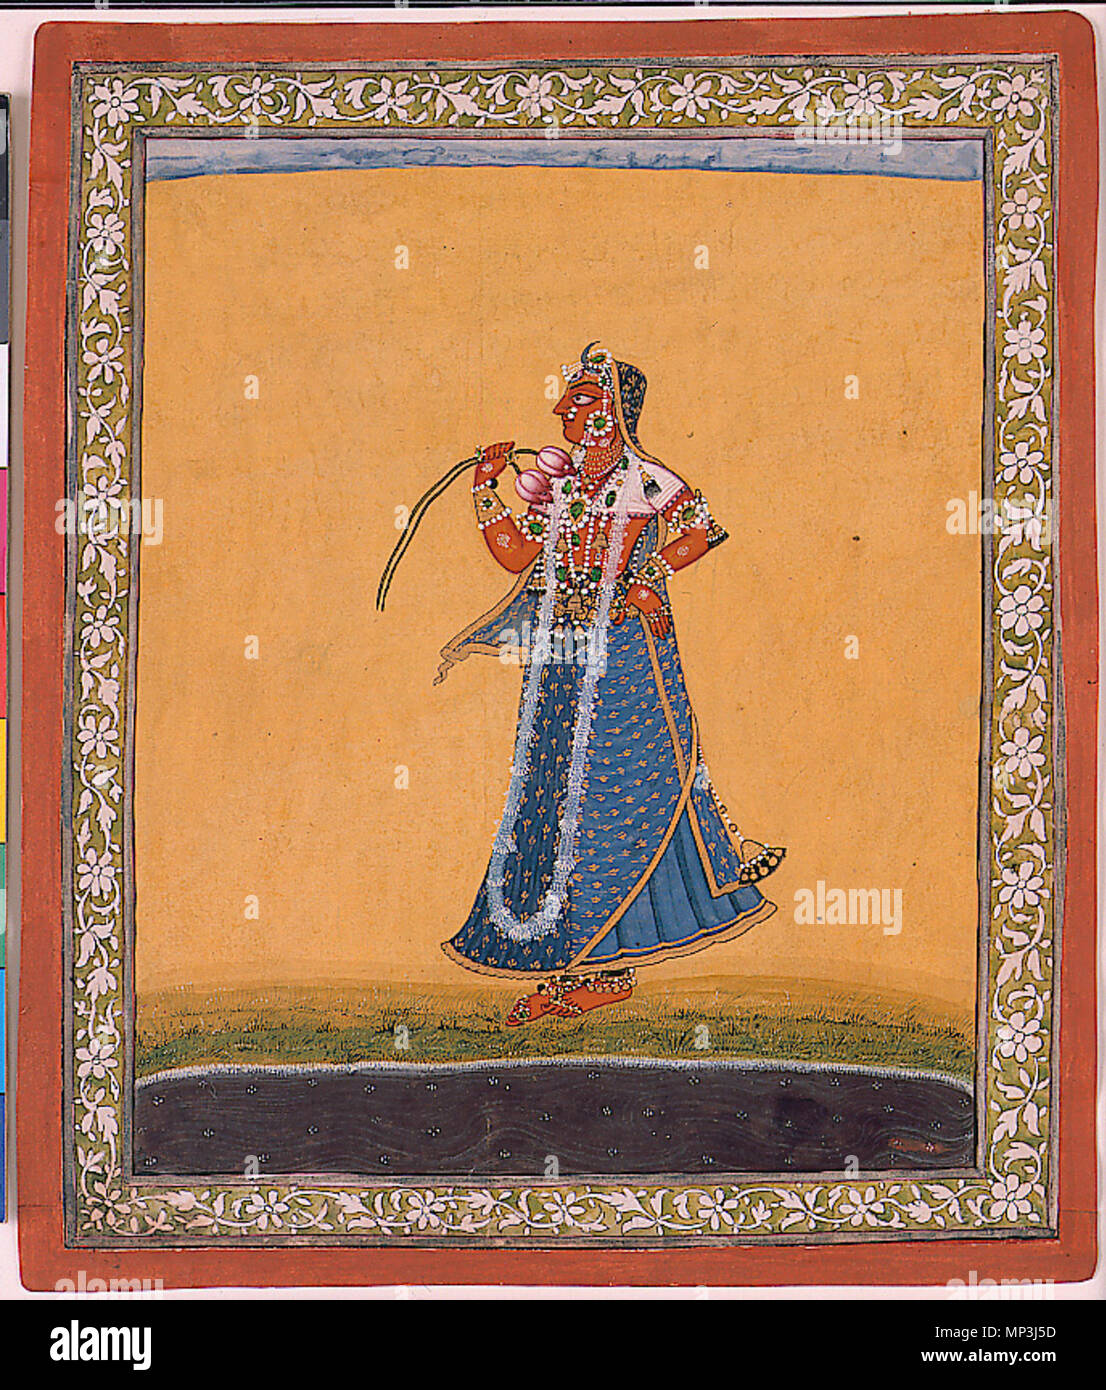 . English: Series Title: [Devi Series] Suite Name: [Devi Series] Creation Date: ca. 1660 Display Dimensions: 9 1/16 in. x 7 11/16 in. (23 cm x 19.5 cm) Credit Line: Edwin Binney 3rd Collection Accession Number: 1990.1037 Collection: <a href='http://www.sdmart.org/art/our-collection/asian-art' rel='nofollow'>The San Diego Museum of Art</a> . 6 September 2011, 14:07:55. English: thesandiegomuseumofartcollection 1176 The Joyful Devi (6125058962) Stock Photo